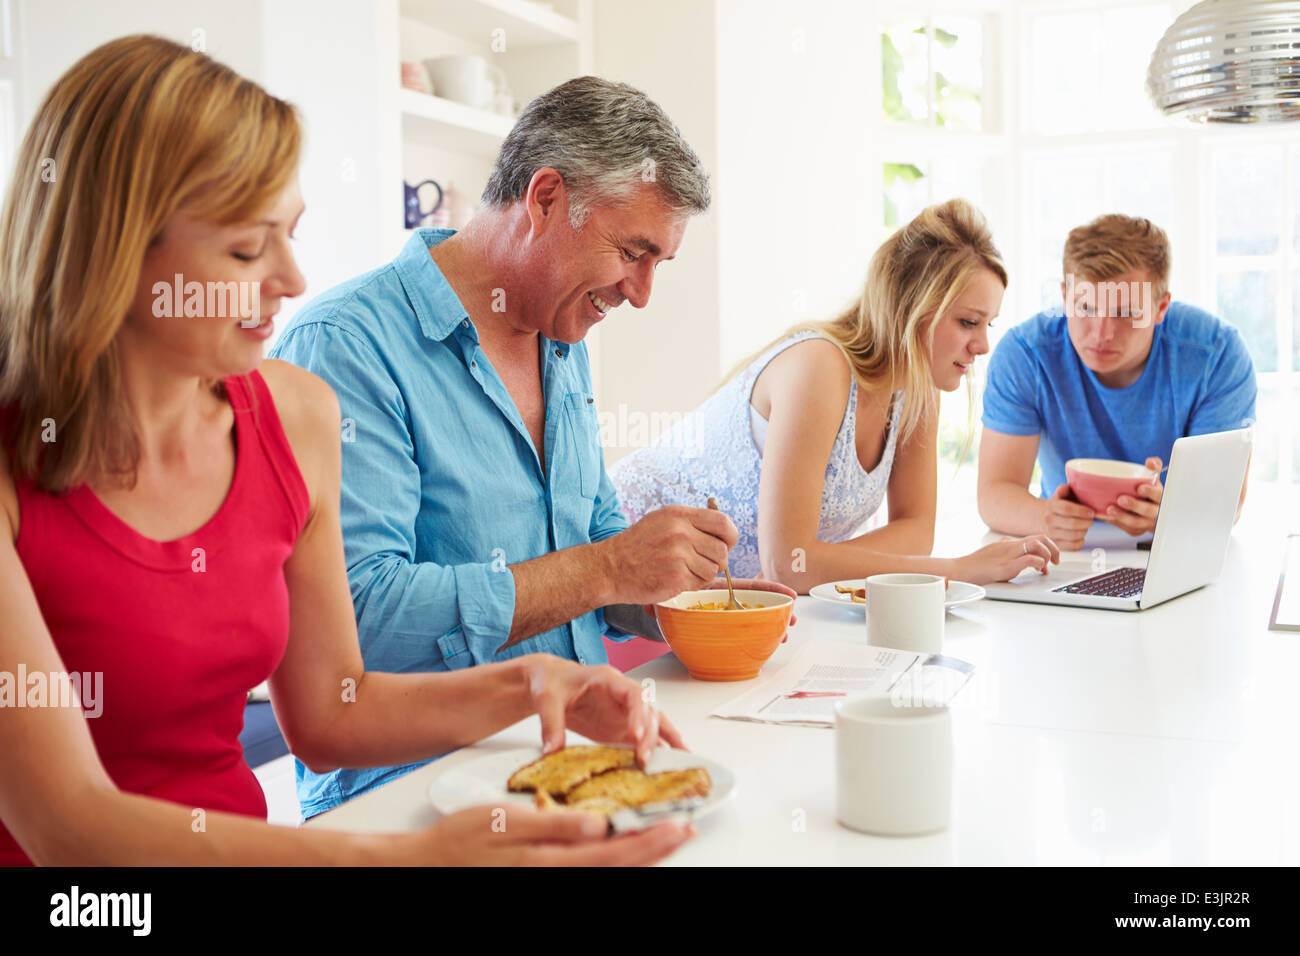 Teenage Family Having Breakfast In Kitchen With Laptop Stock Photo